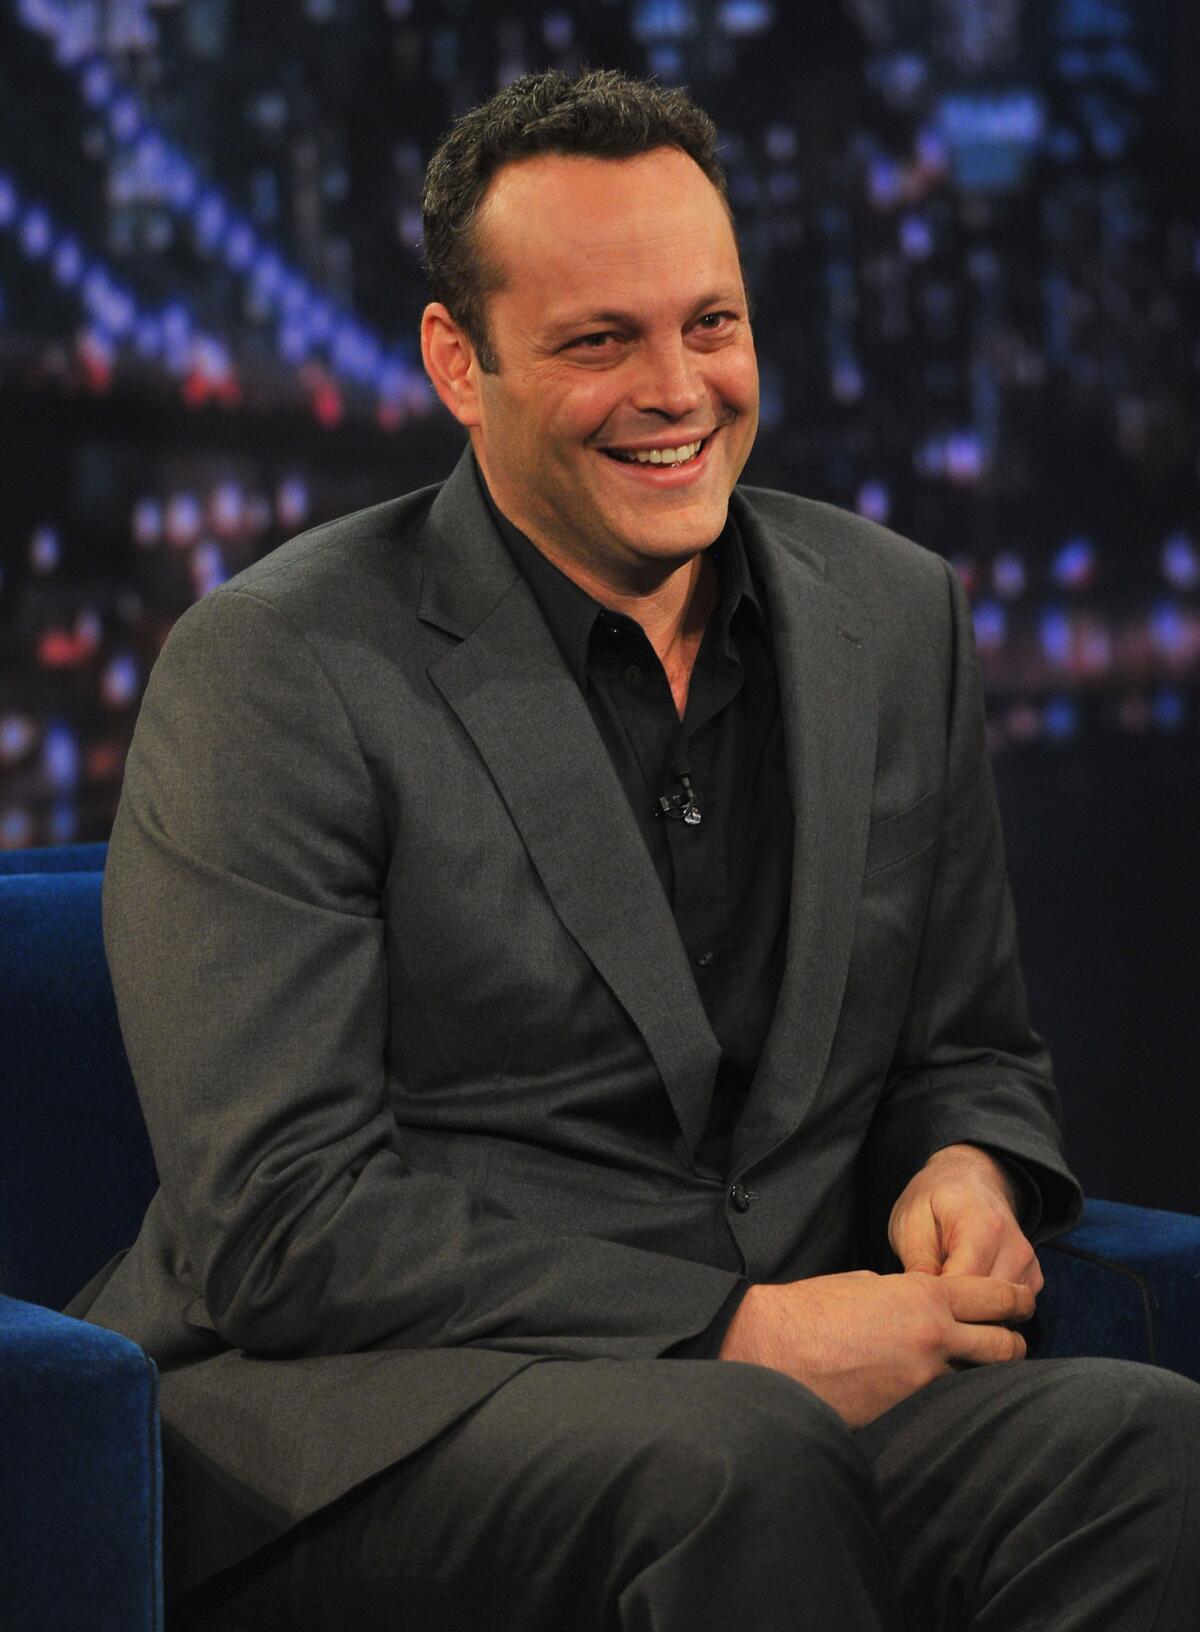 Vince Vaughn will be among those bringing their talents to YouTube's Comedy Week.